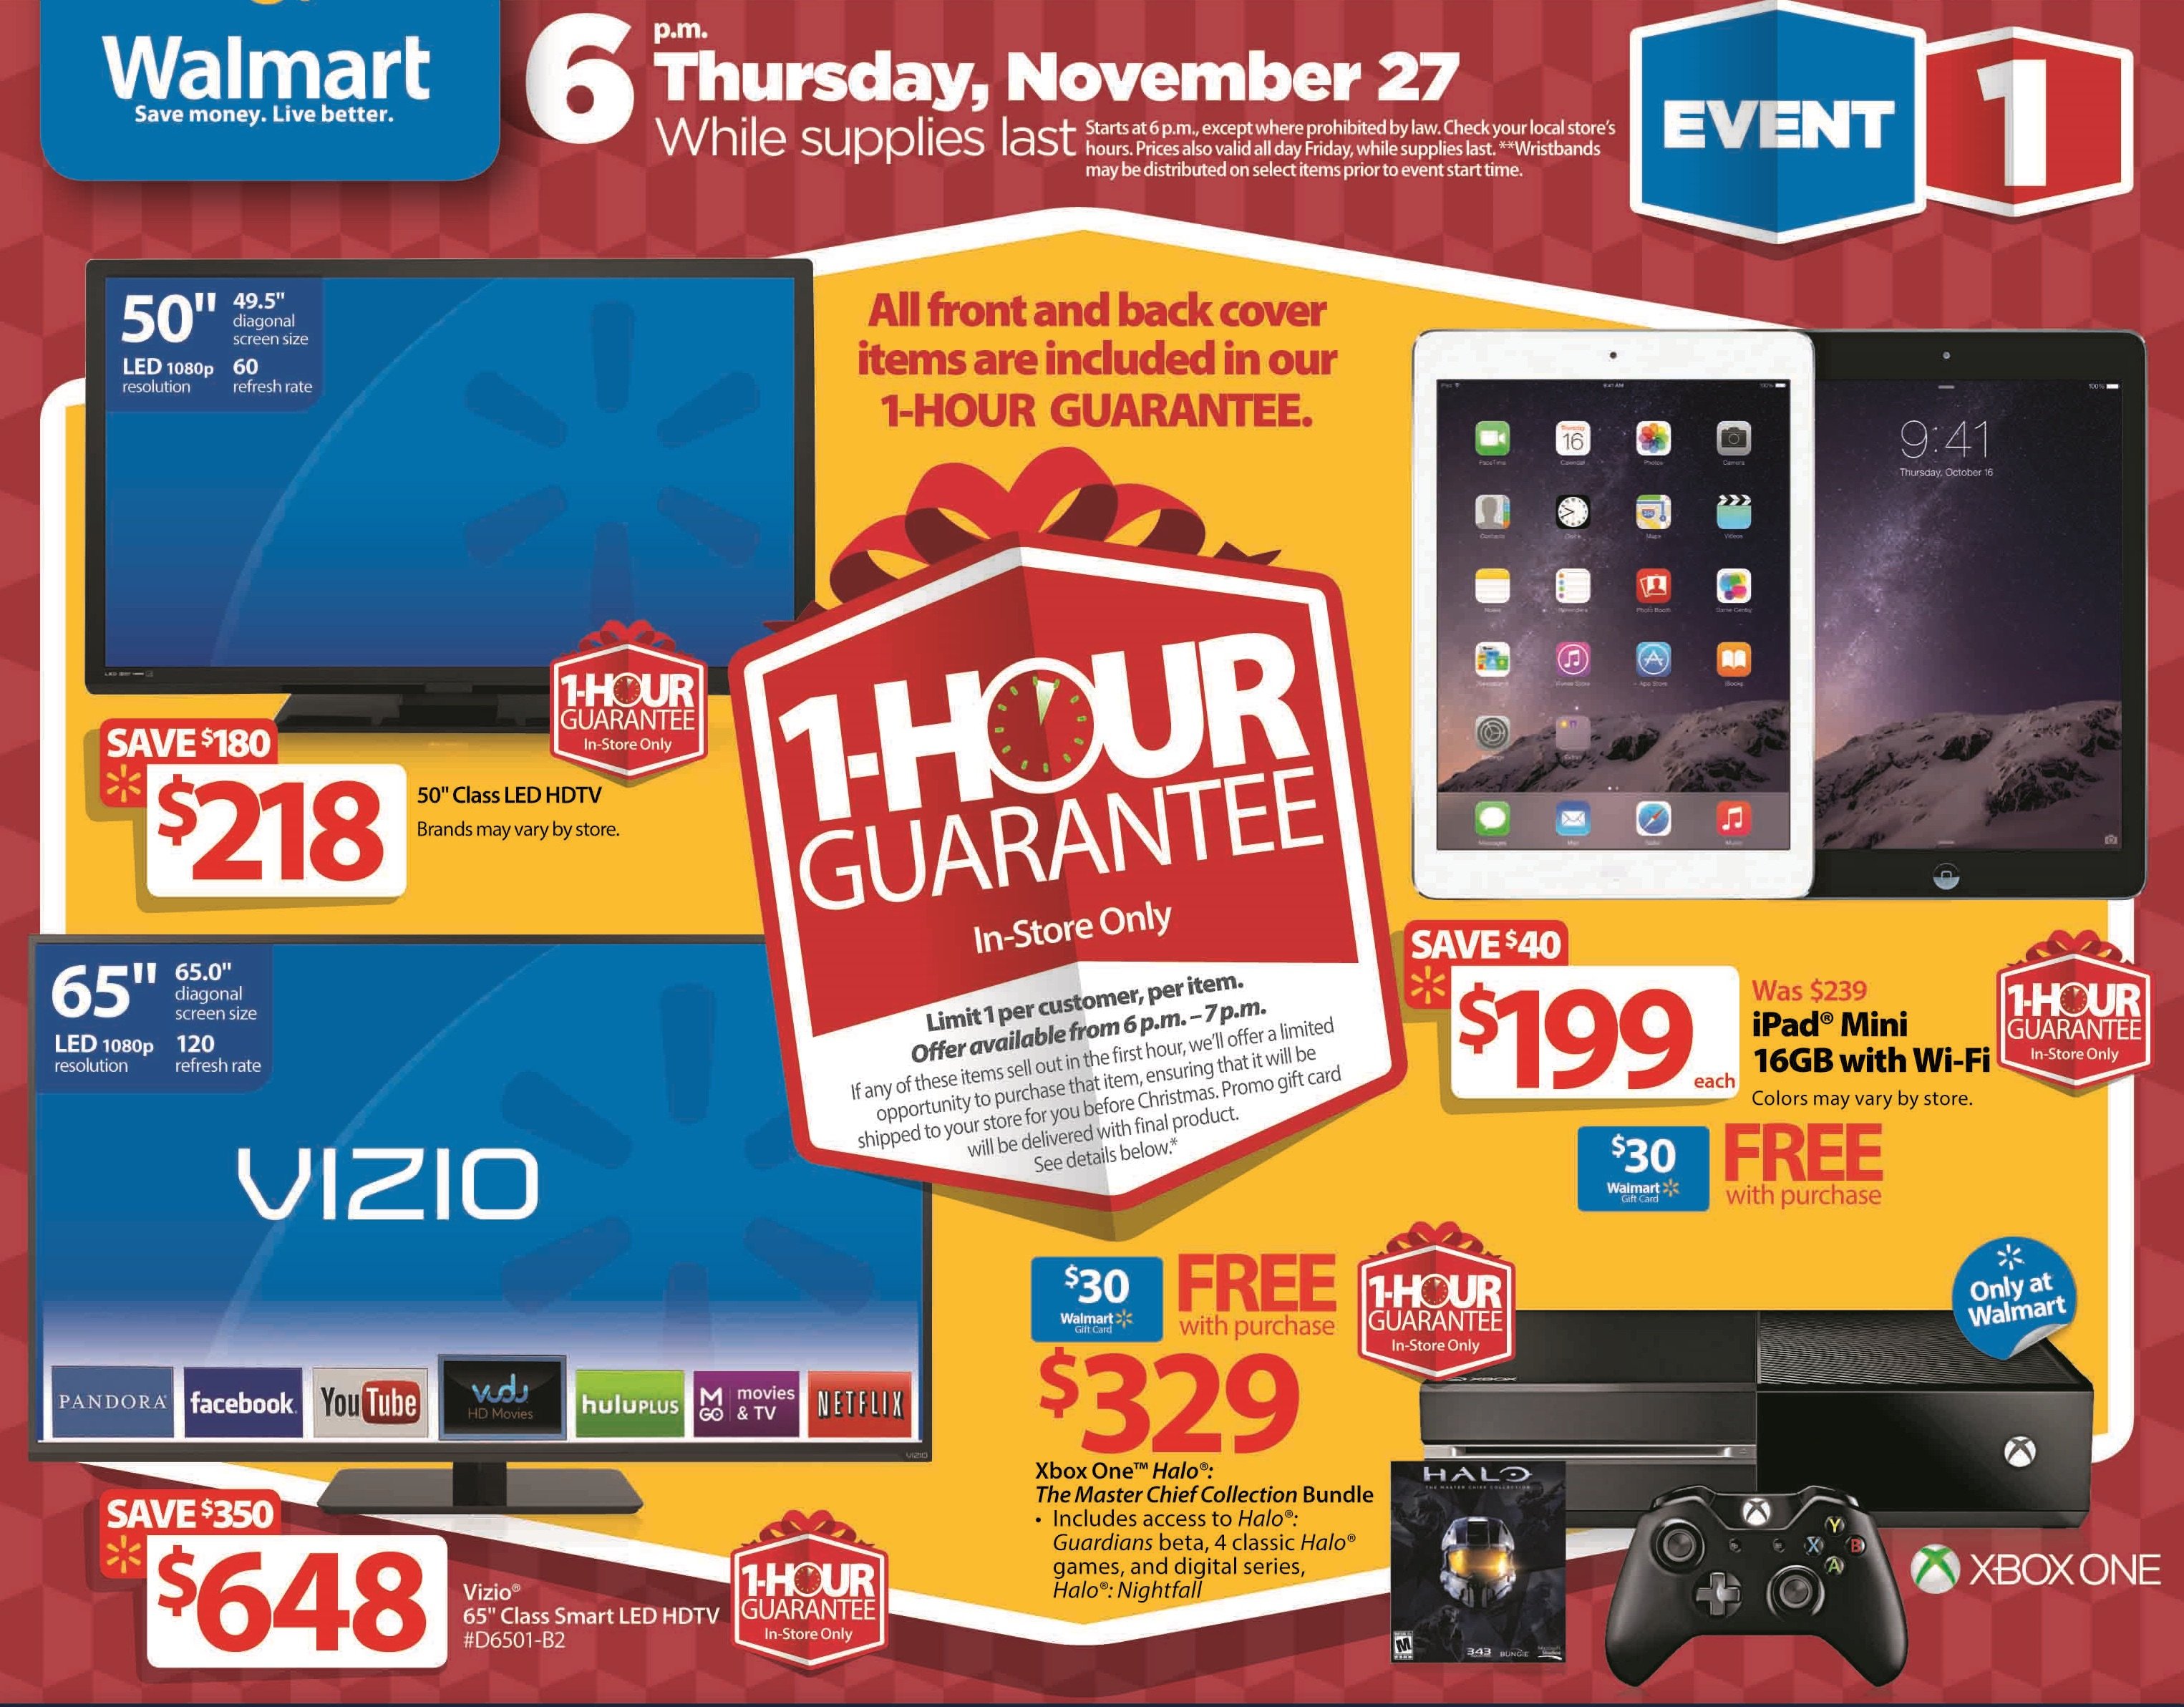 The Walmart Black Friday 2014 ad reveals the new 1 Hour Guarantee items including an iPad mini and Xbox One with Halo: The Master Chief Collection.